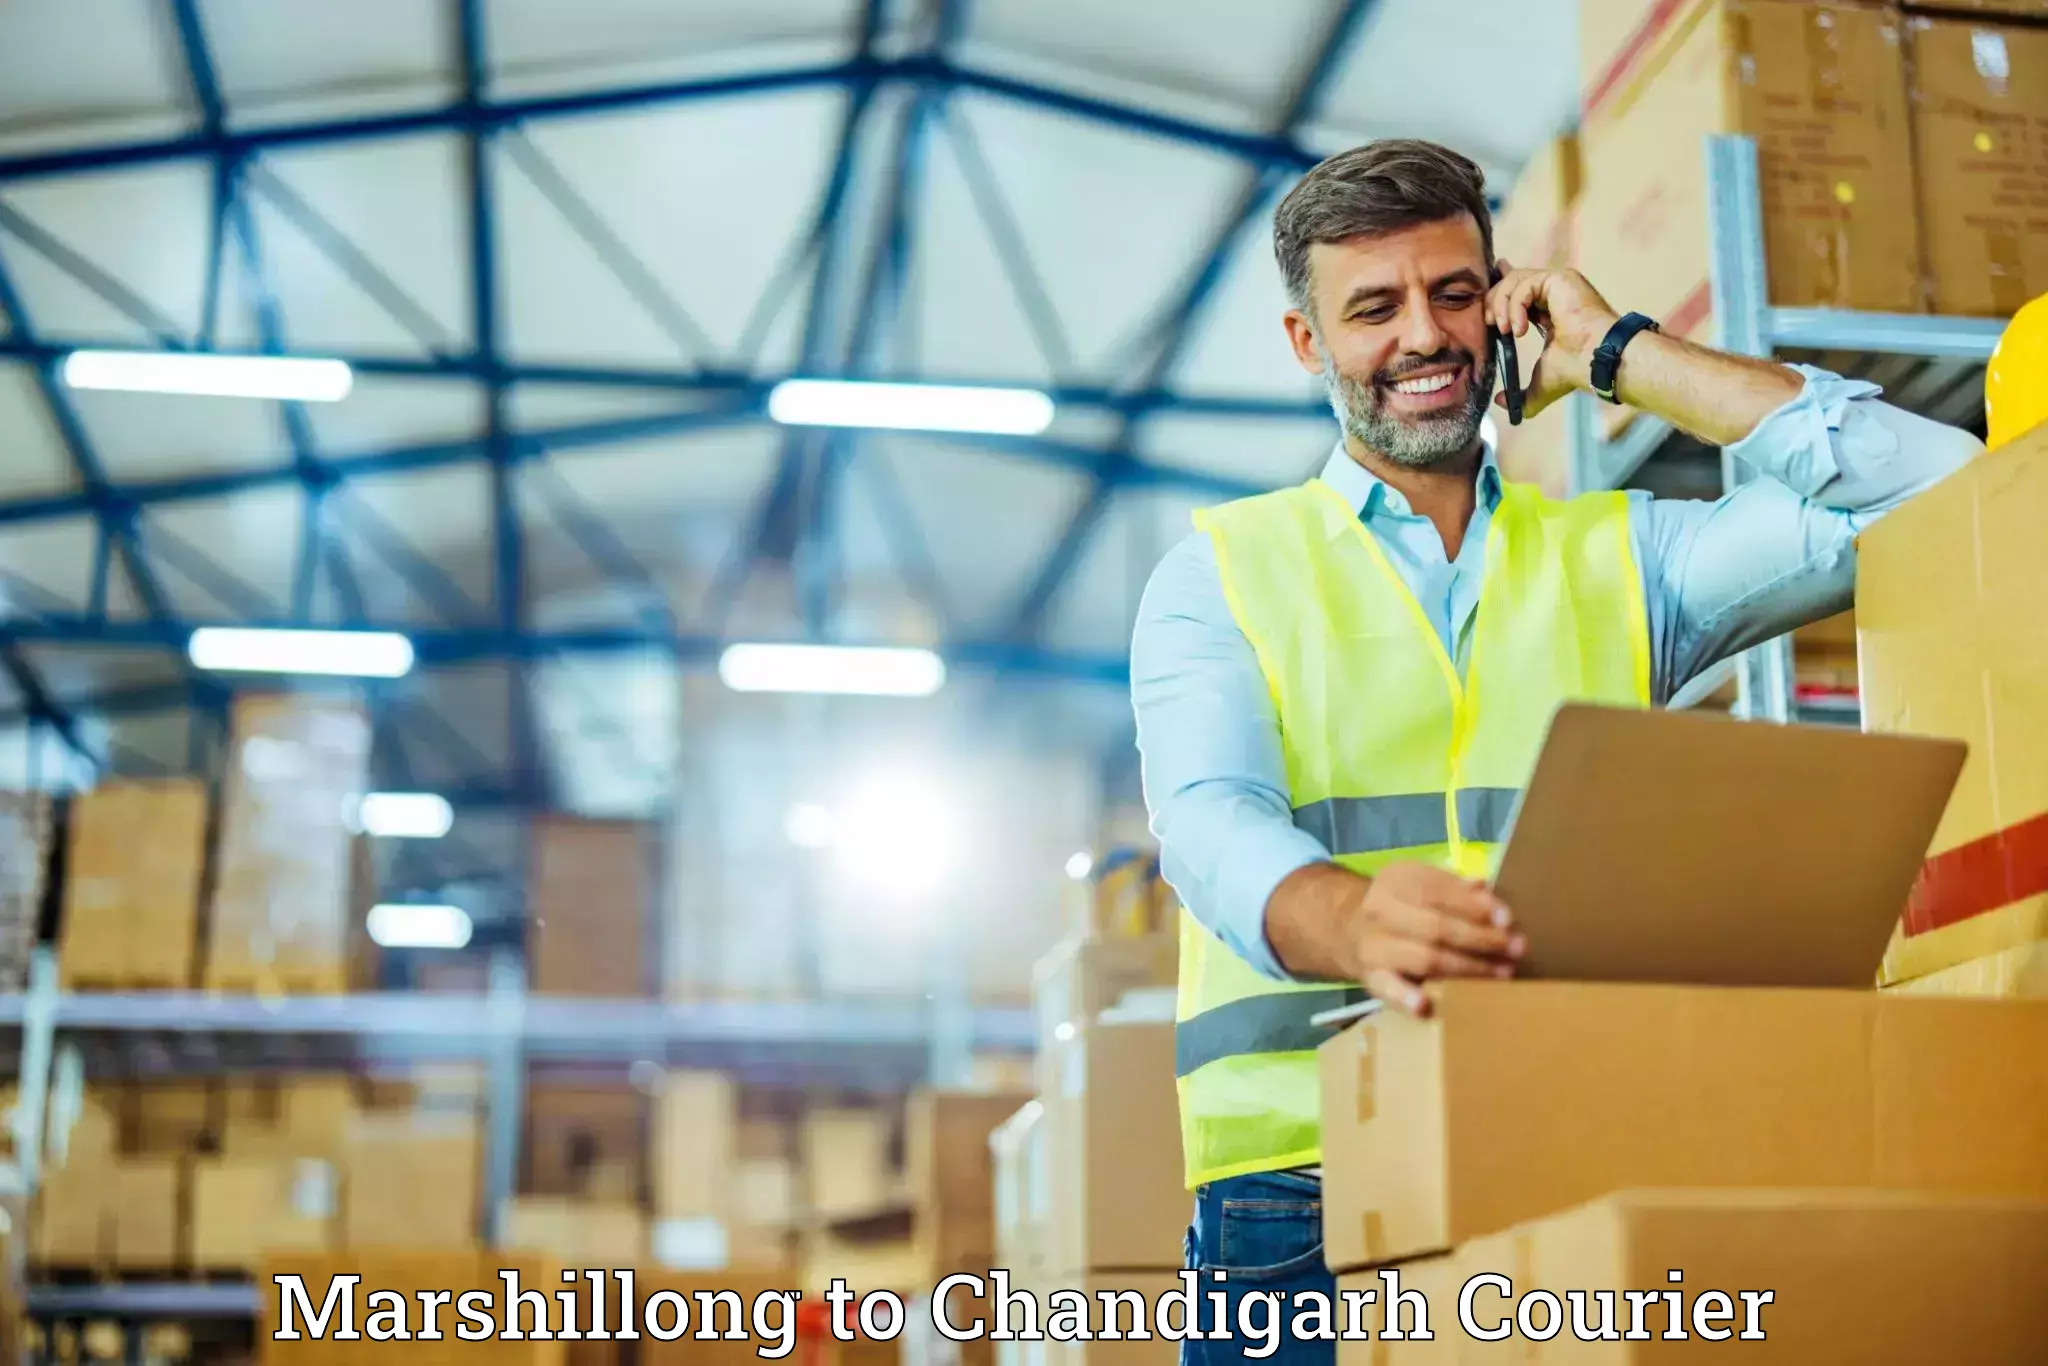 Furniture moving service Marshillong to Chandigarh